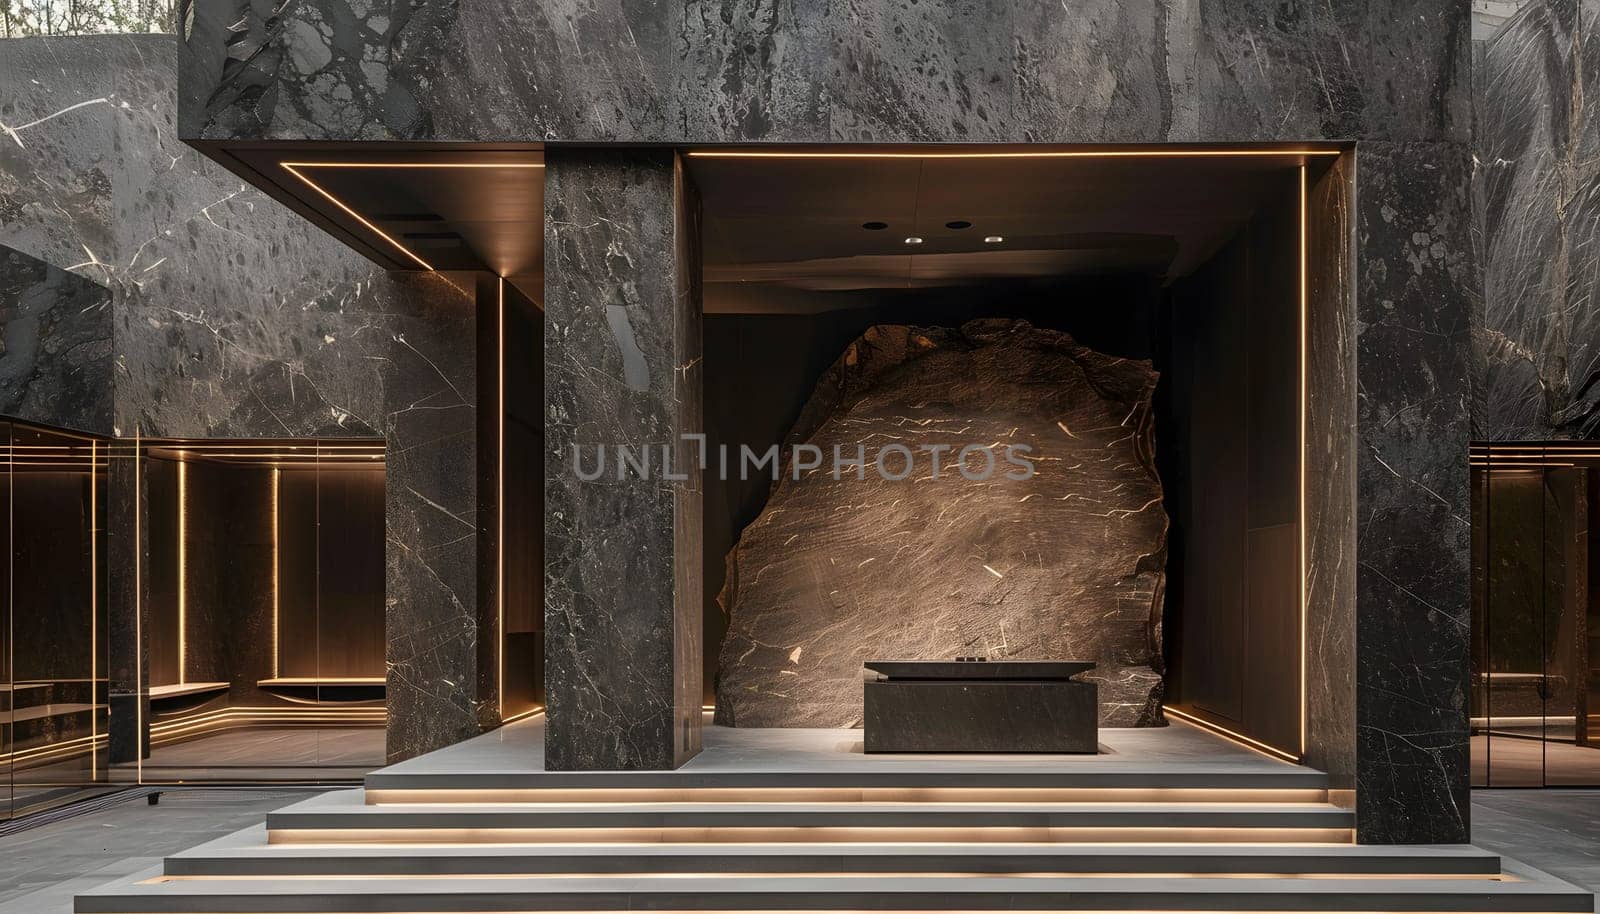 A fixture made of composite material, resembling a large rock, is positioned in the center of the symmetrical room within the historic building